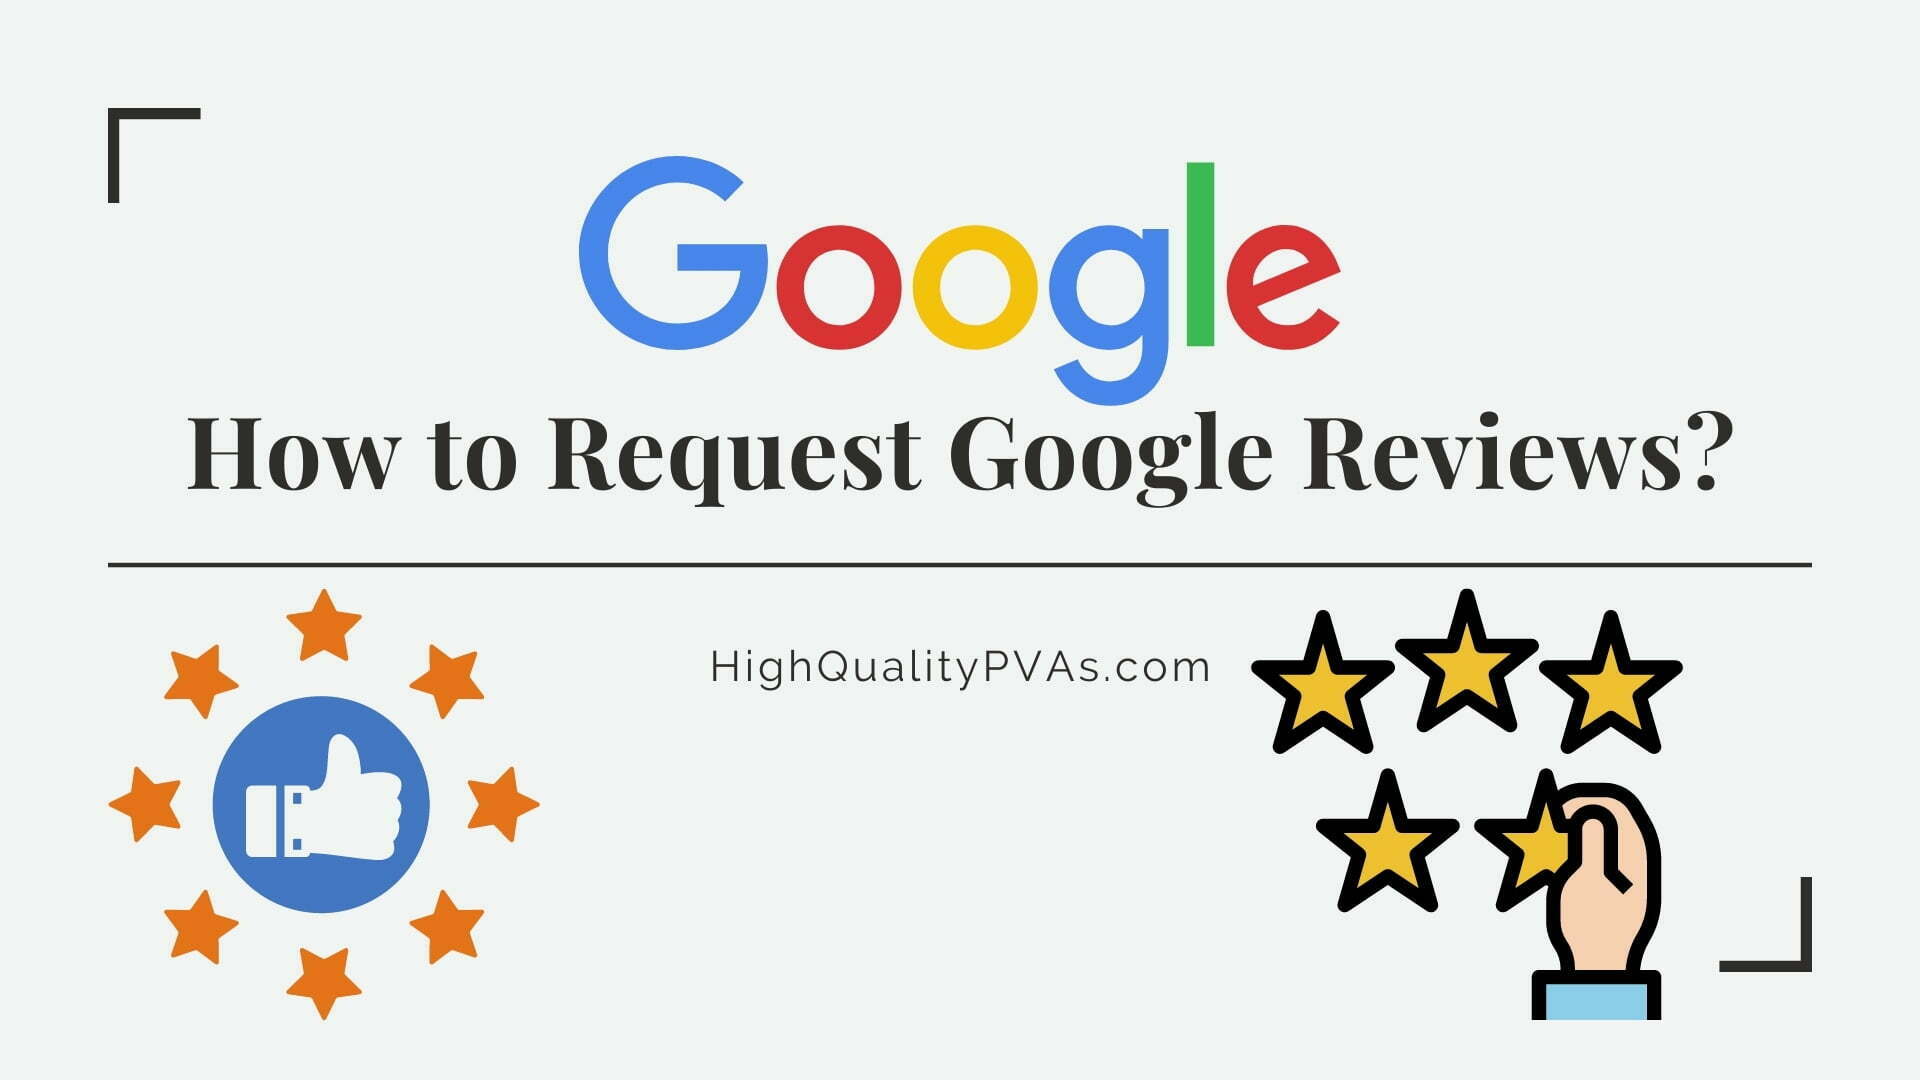 How to Request Google Reviews?